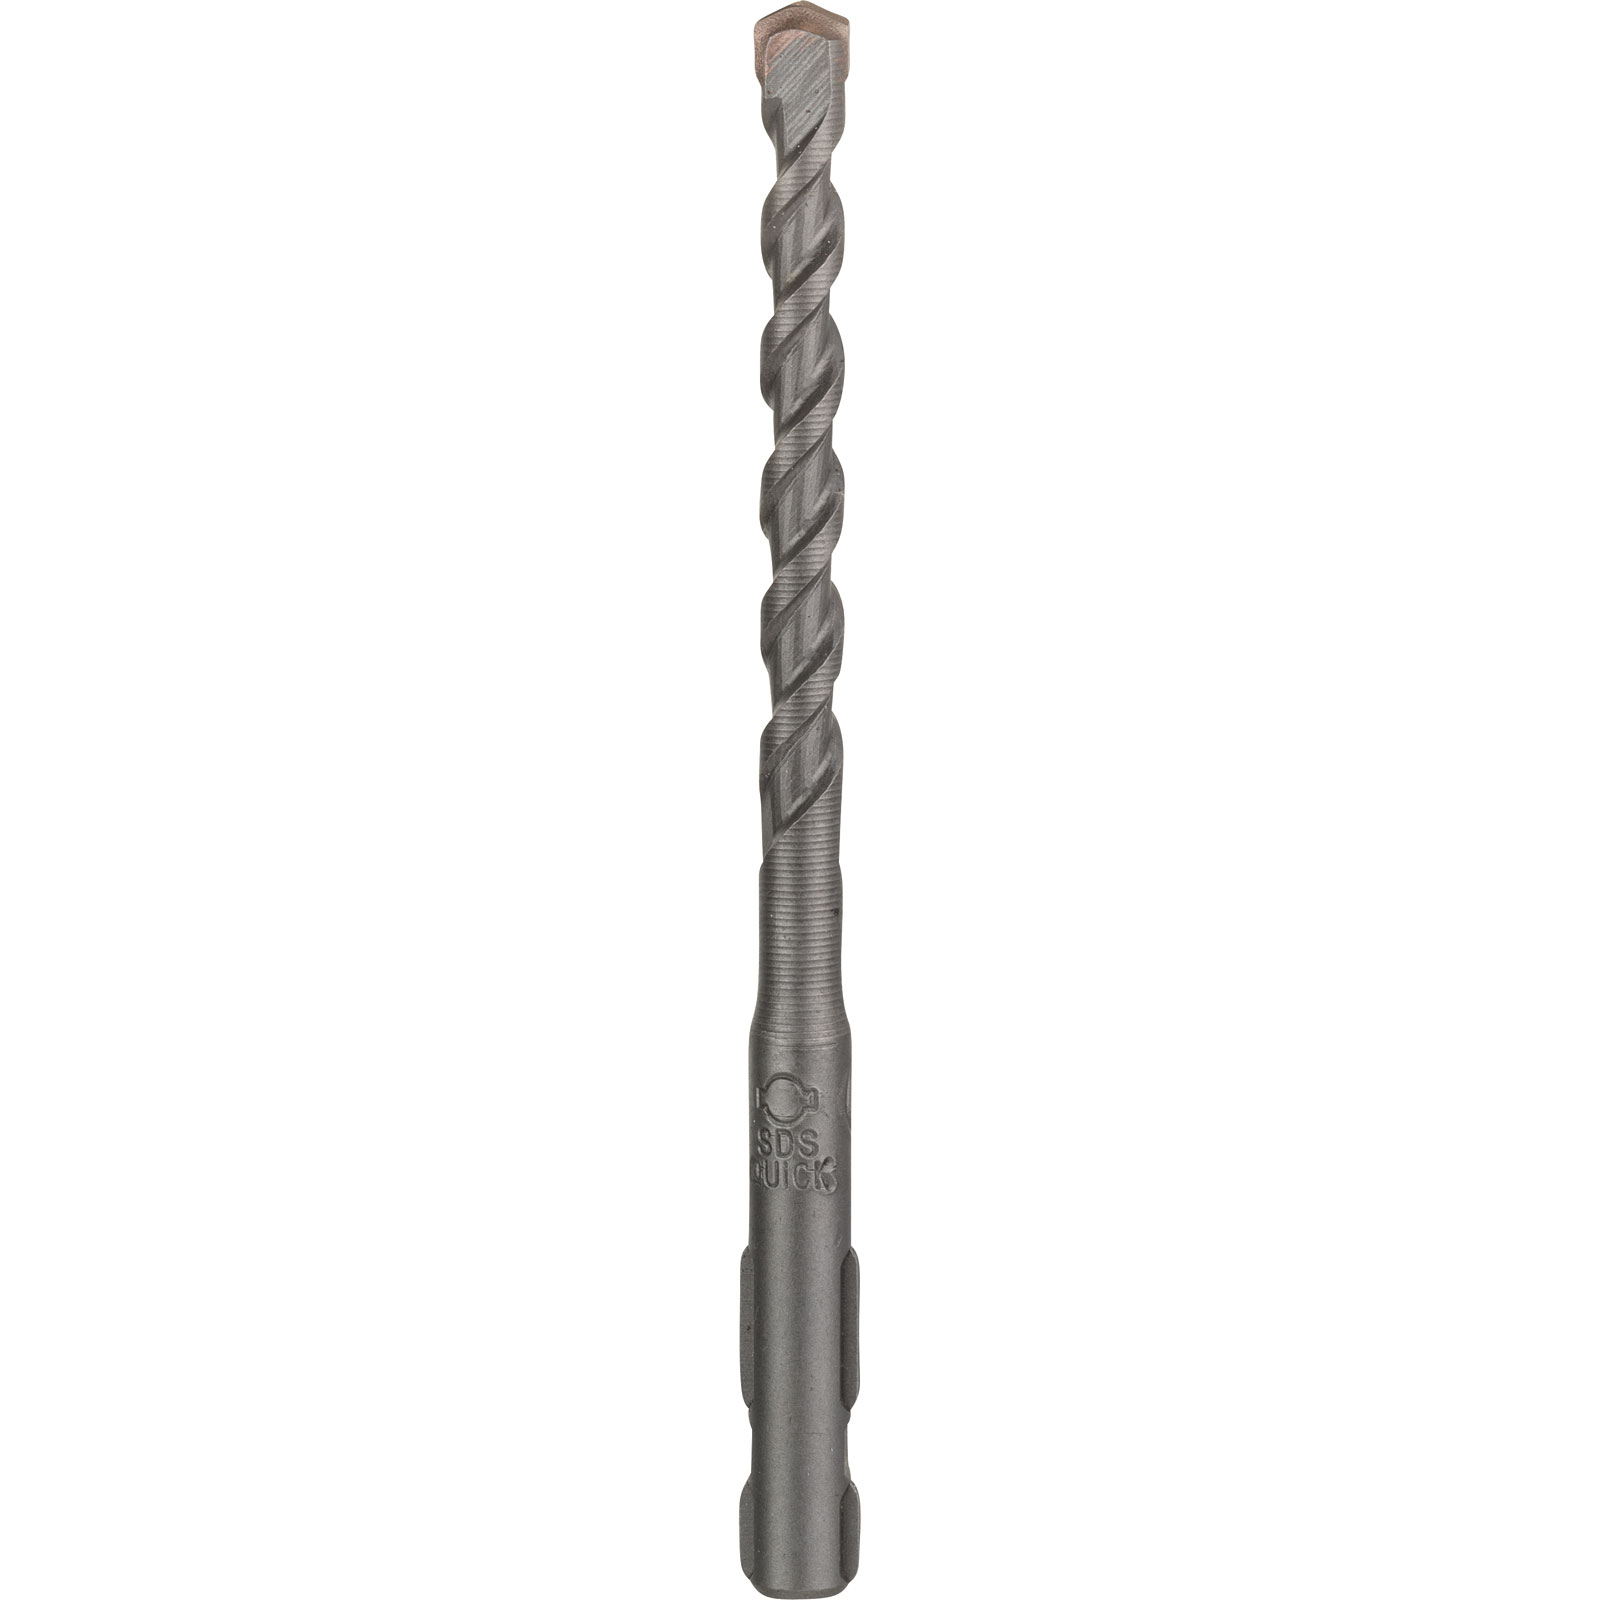 Photo of Bosch Uneo Sds Quick Masonary Drill Bit 6mm 100mm Pack Of 1